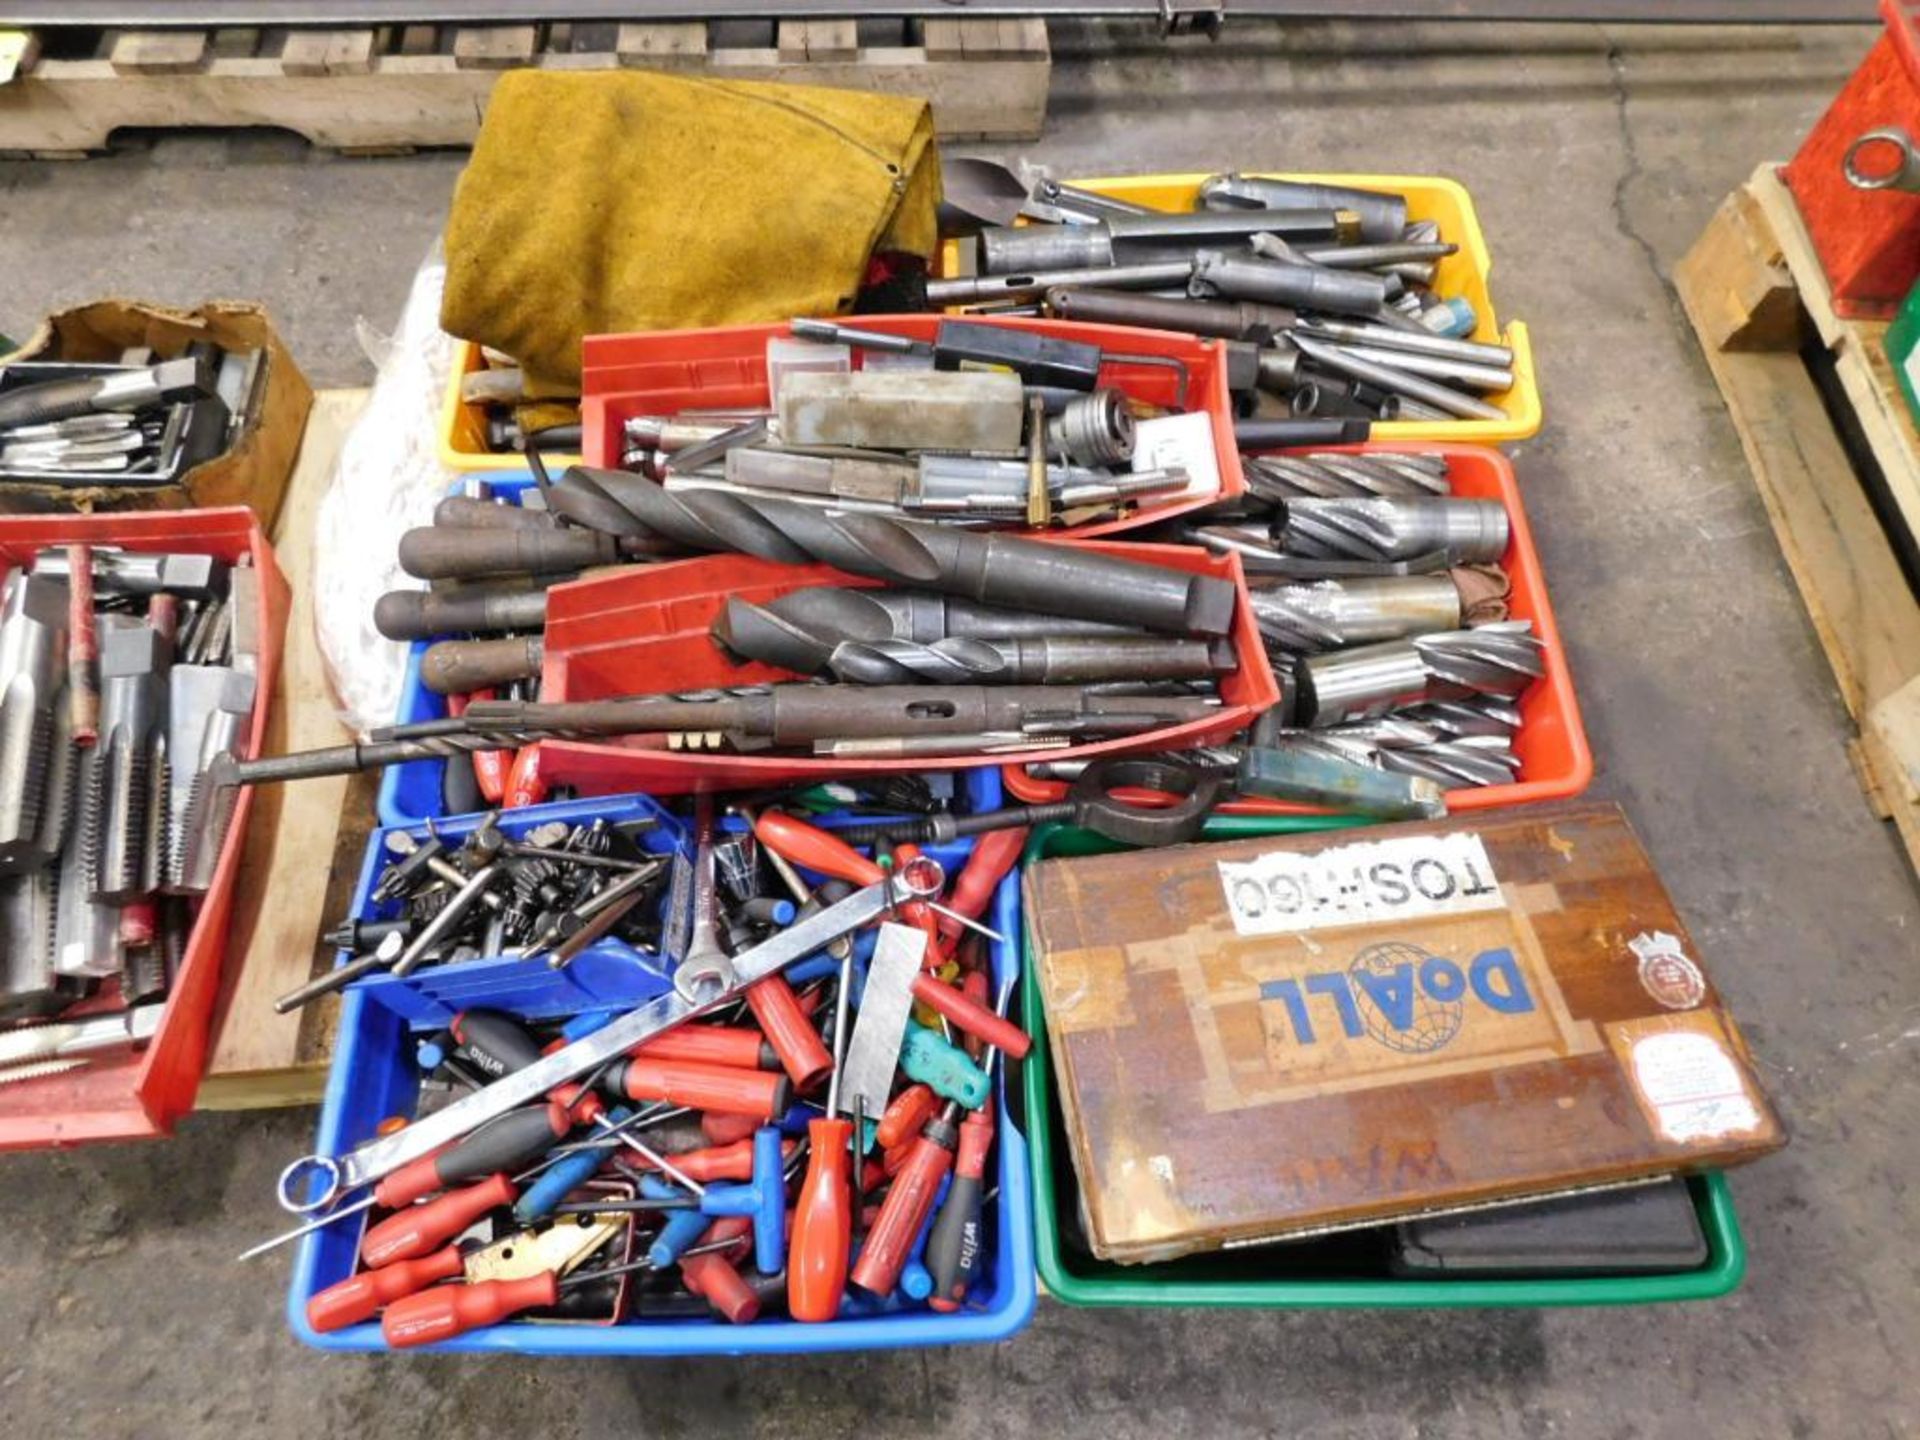 LOT: Assorted Large Roughing Endmills, Taps, Spade Drills, Taper Shank Drill Bits, Chuck Keys, Wrenc - Image 3 of 6